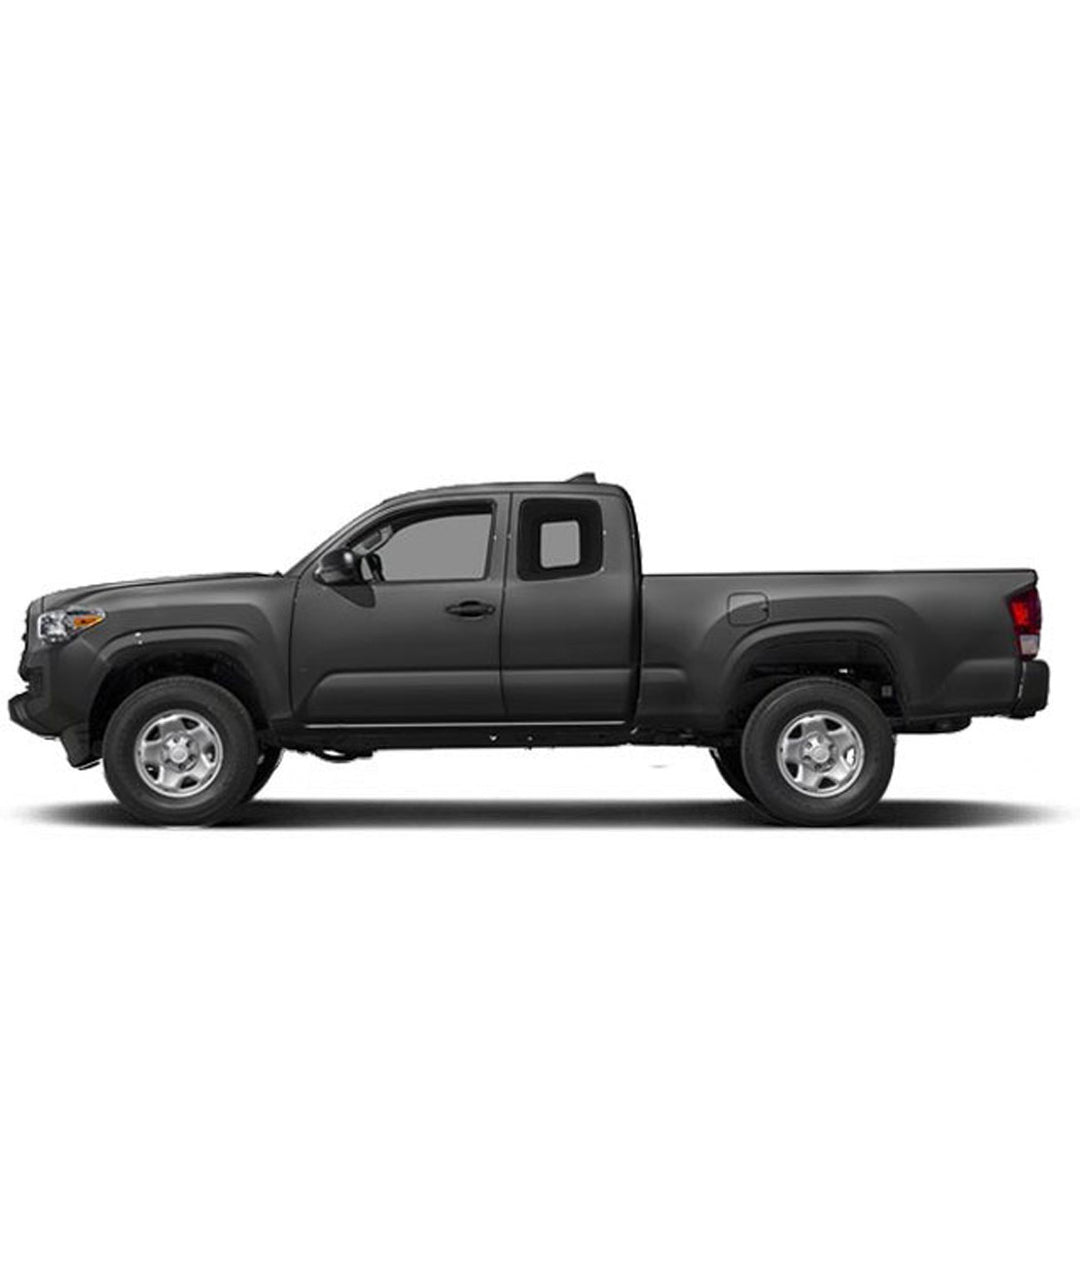 2016-2023 Toyota Tacoma | Reference 500 | Access Cab Sound System